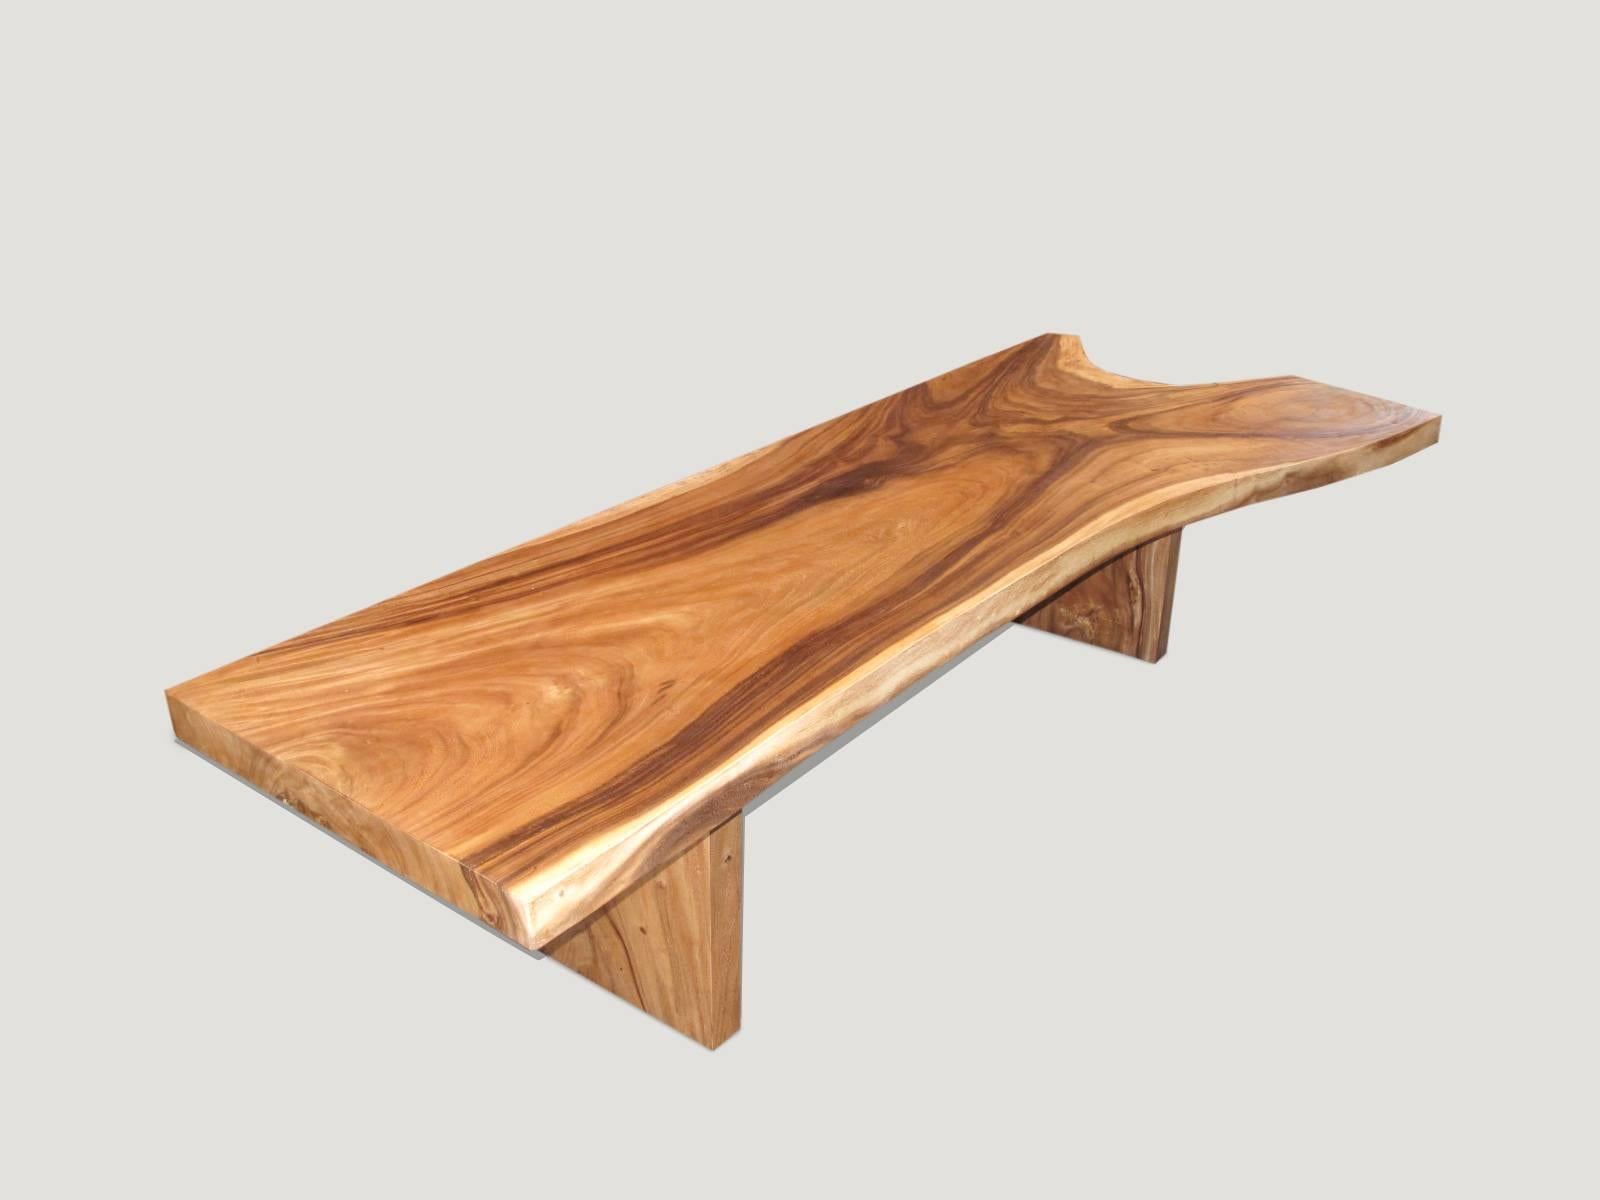 Single slab reclaimed suar wood with beautiful natural contrasting grain. Shown with a modern minimalist base. Custom sizes available.

Own an Andrianna Shamaris original.

Andrianna Shamaris. The Leader In Modern Organic Design™